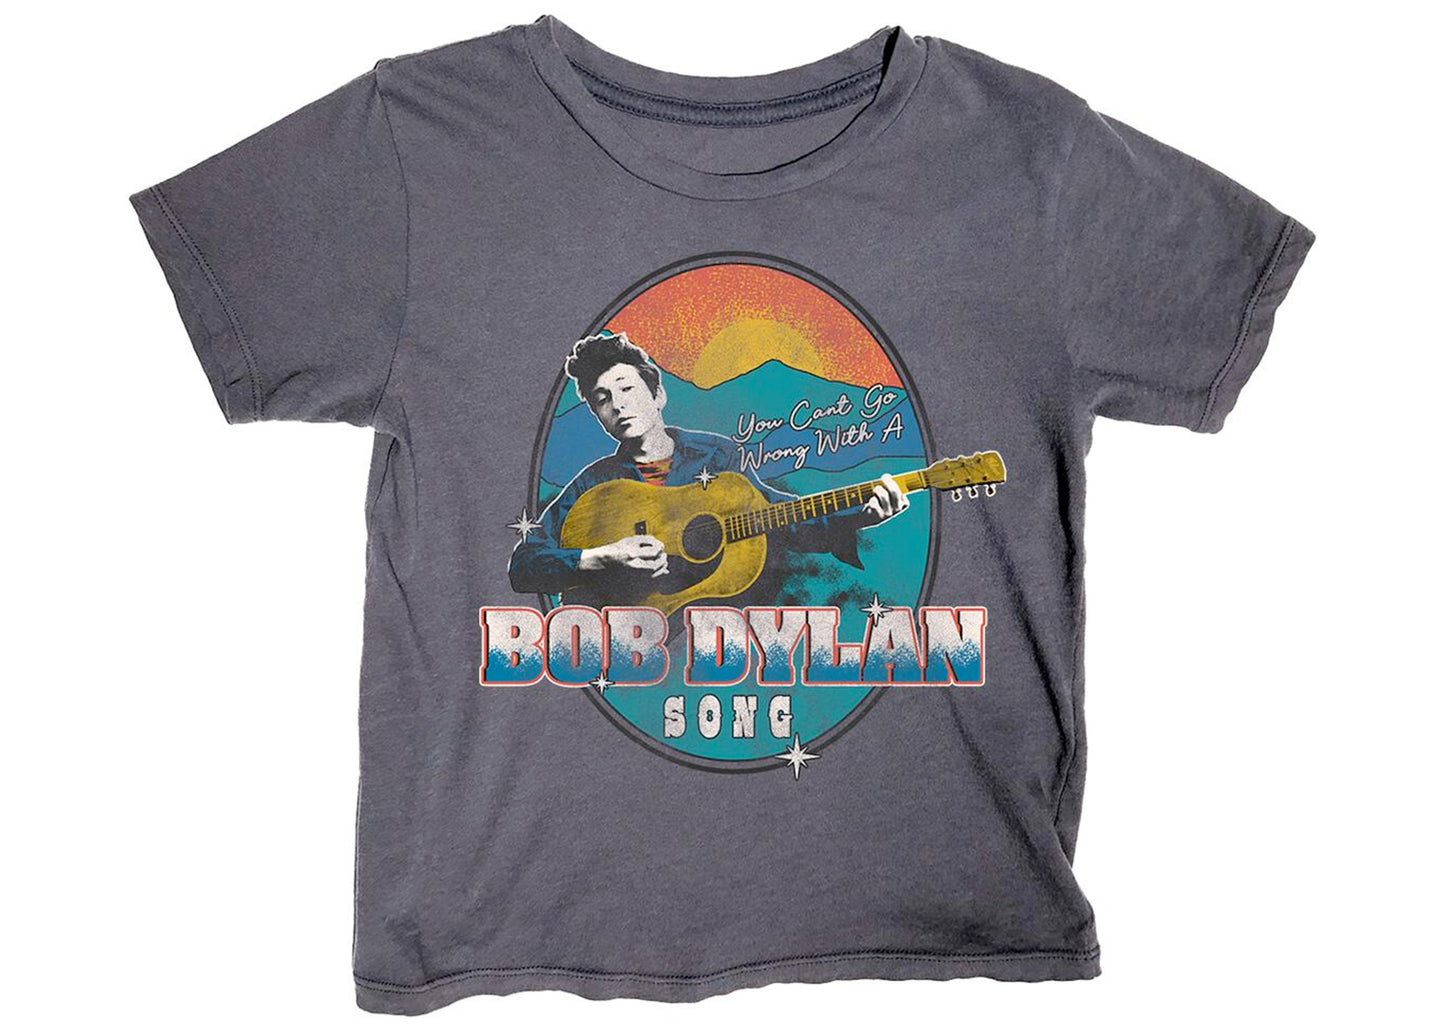 You Can't Go Wrong With A Bob Dylan Song Kids Tee